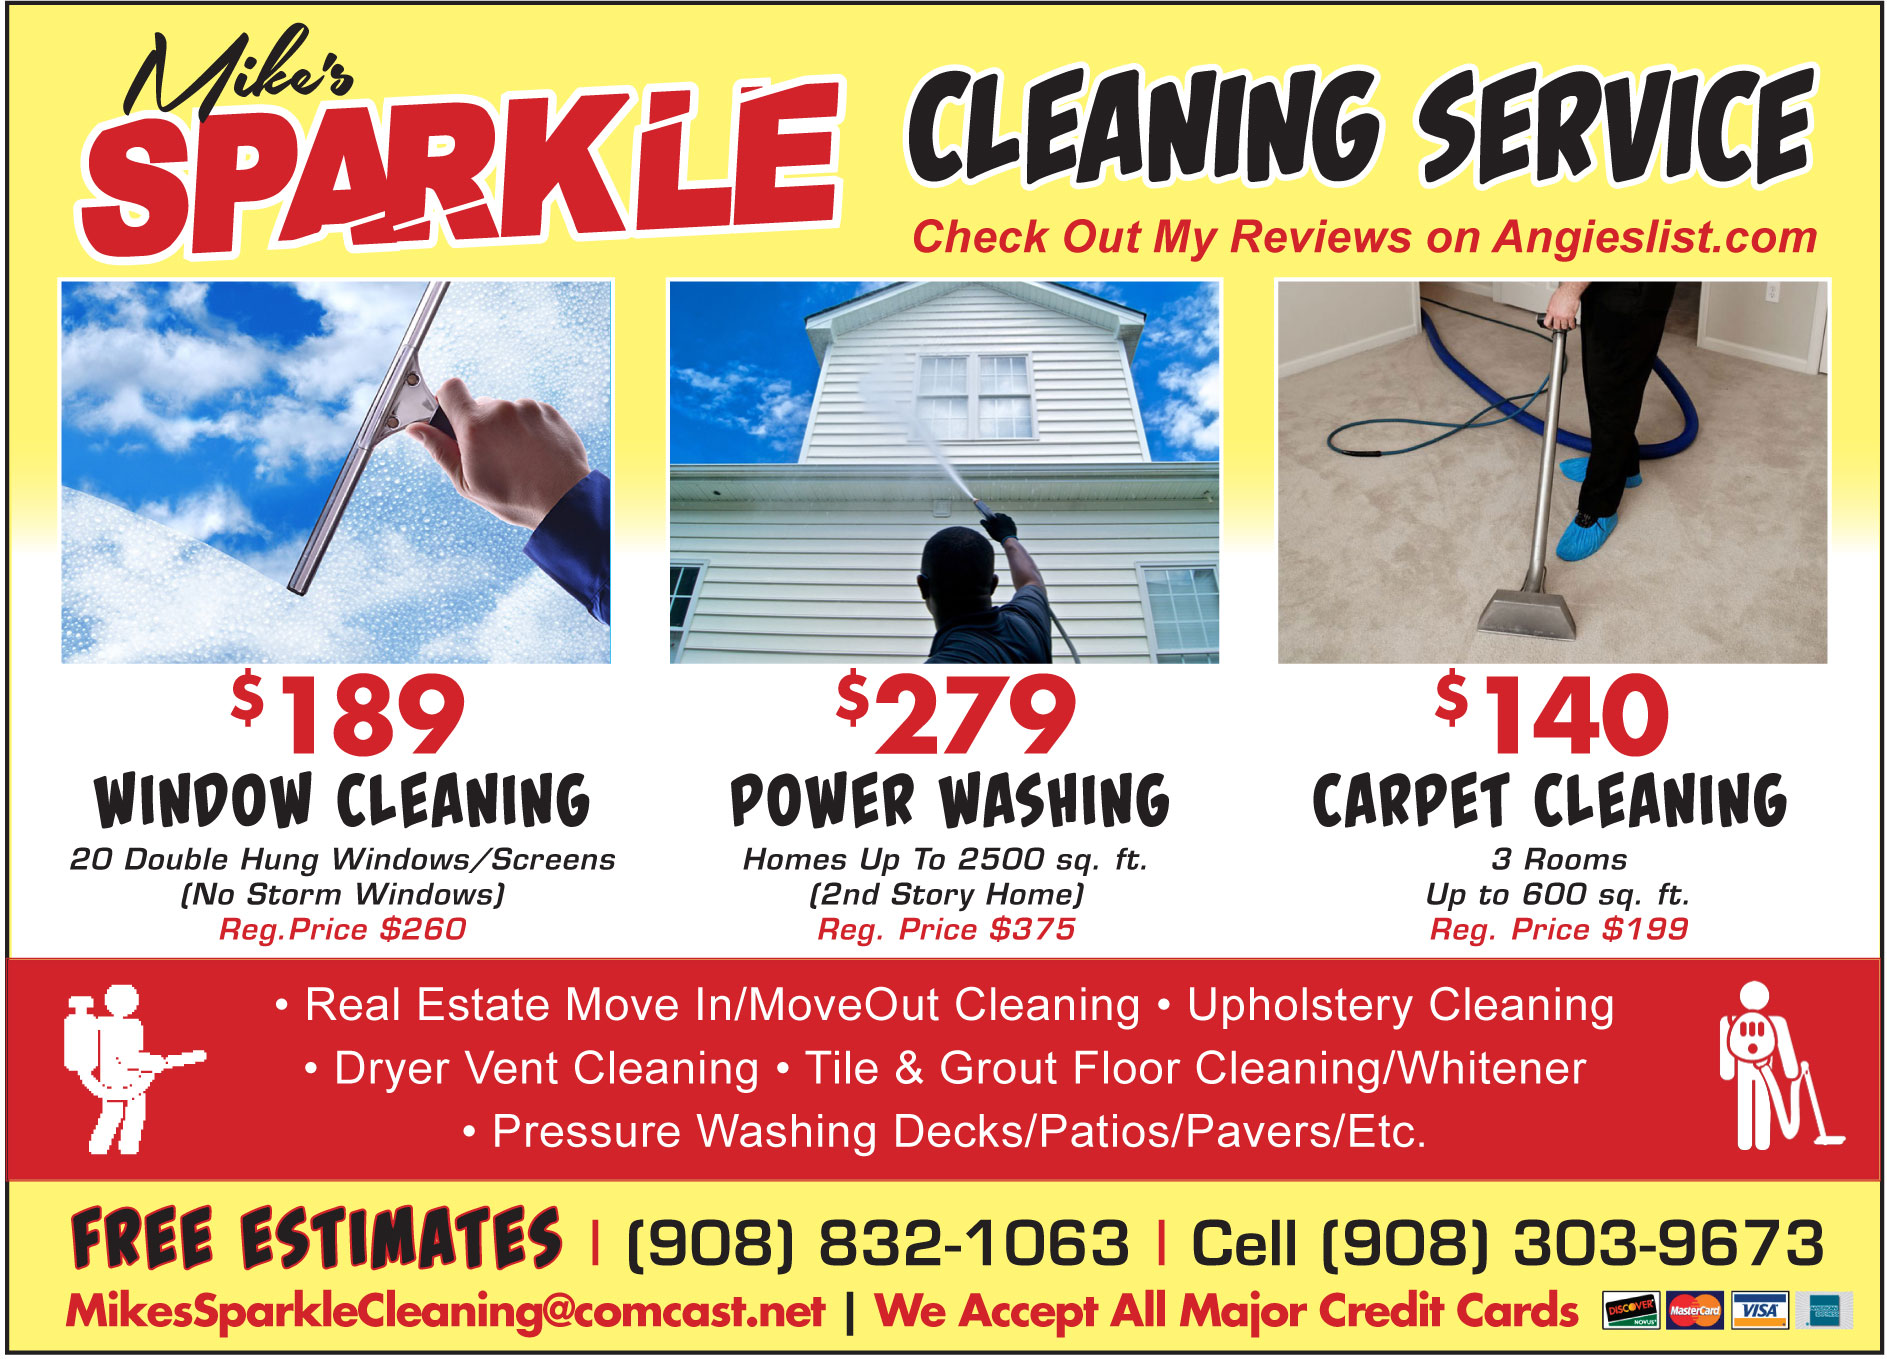 mike's-sparkle-cleaning-service-(wl180).jpg